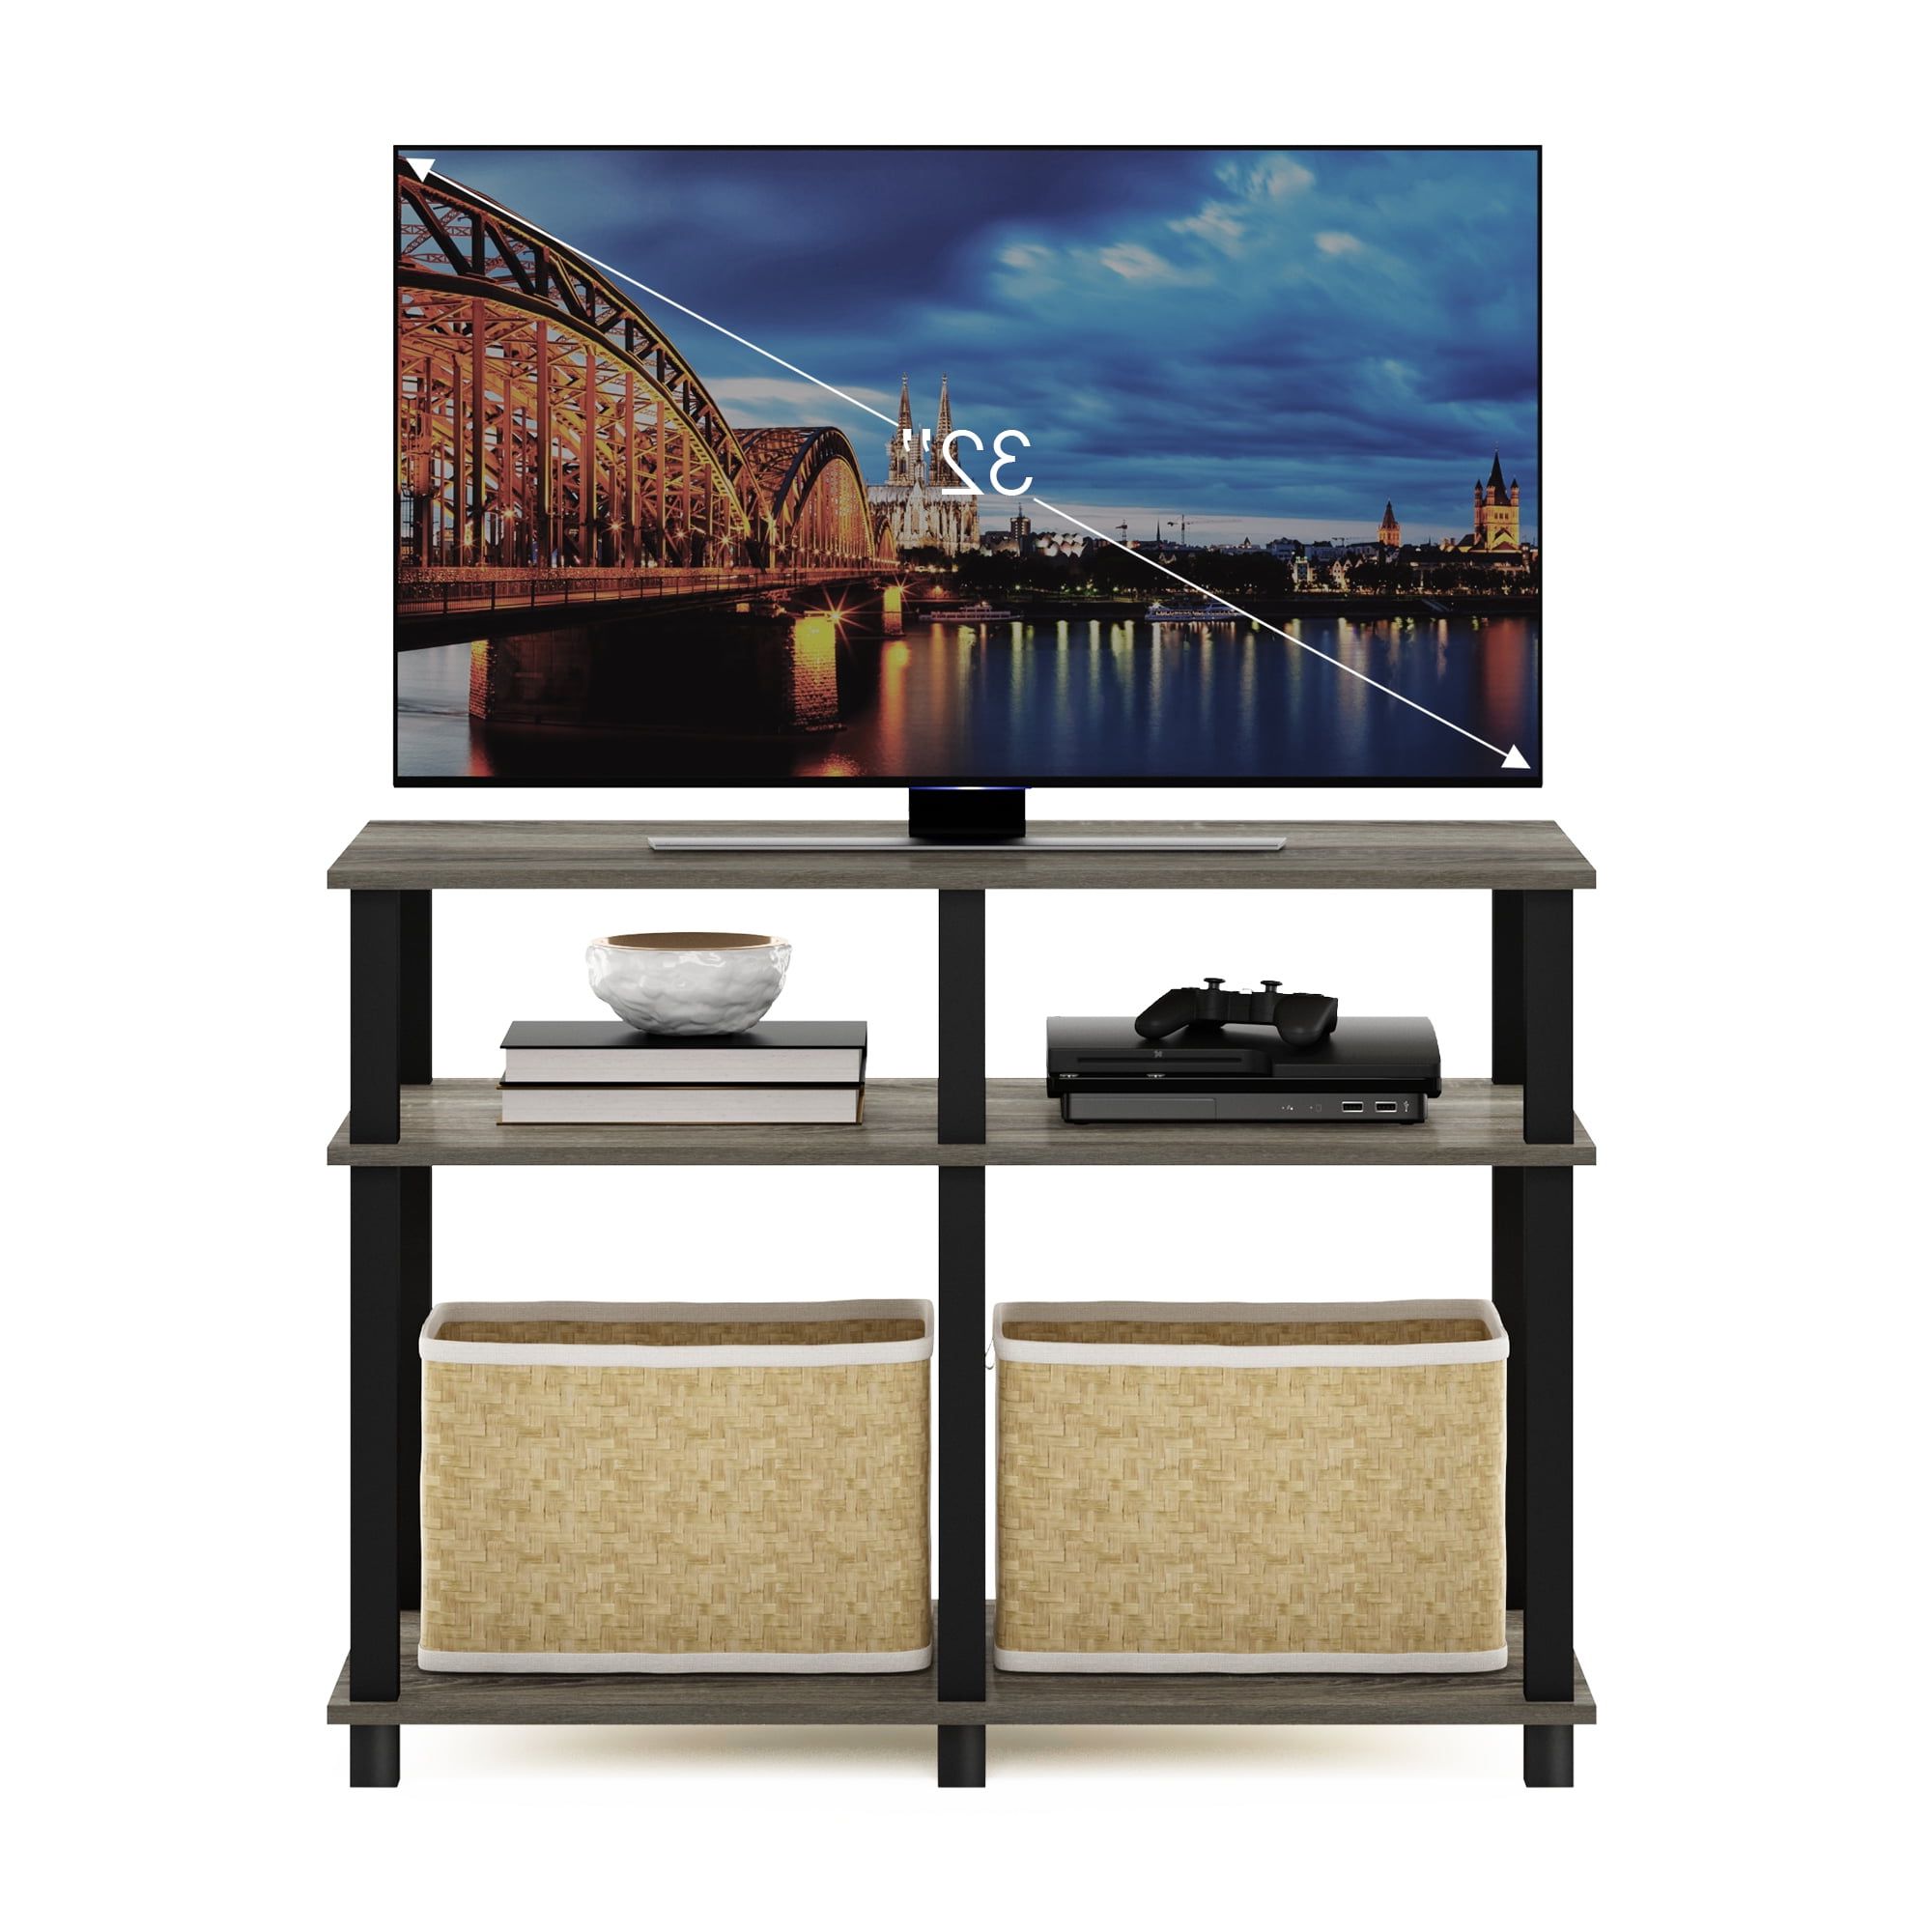 Furinno Romain Turn N Tube Tv Stand For Tv Up To 40 Inch, Espresso/black –  Walmart For Romain Stands For Tvs (Gallery 2 of 20)